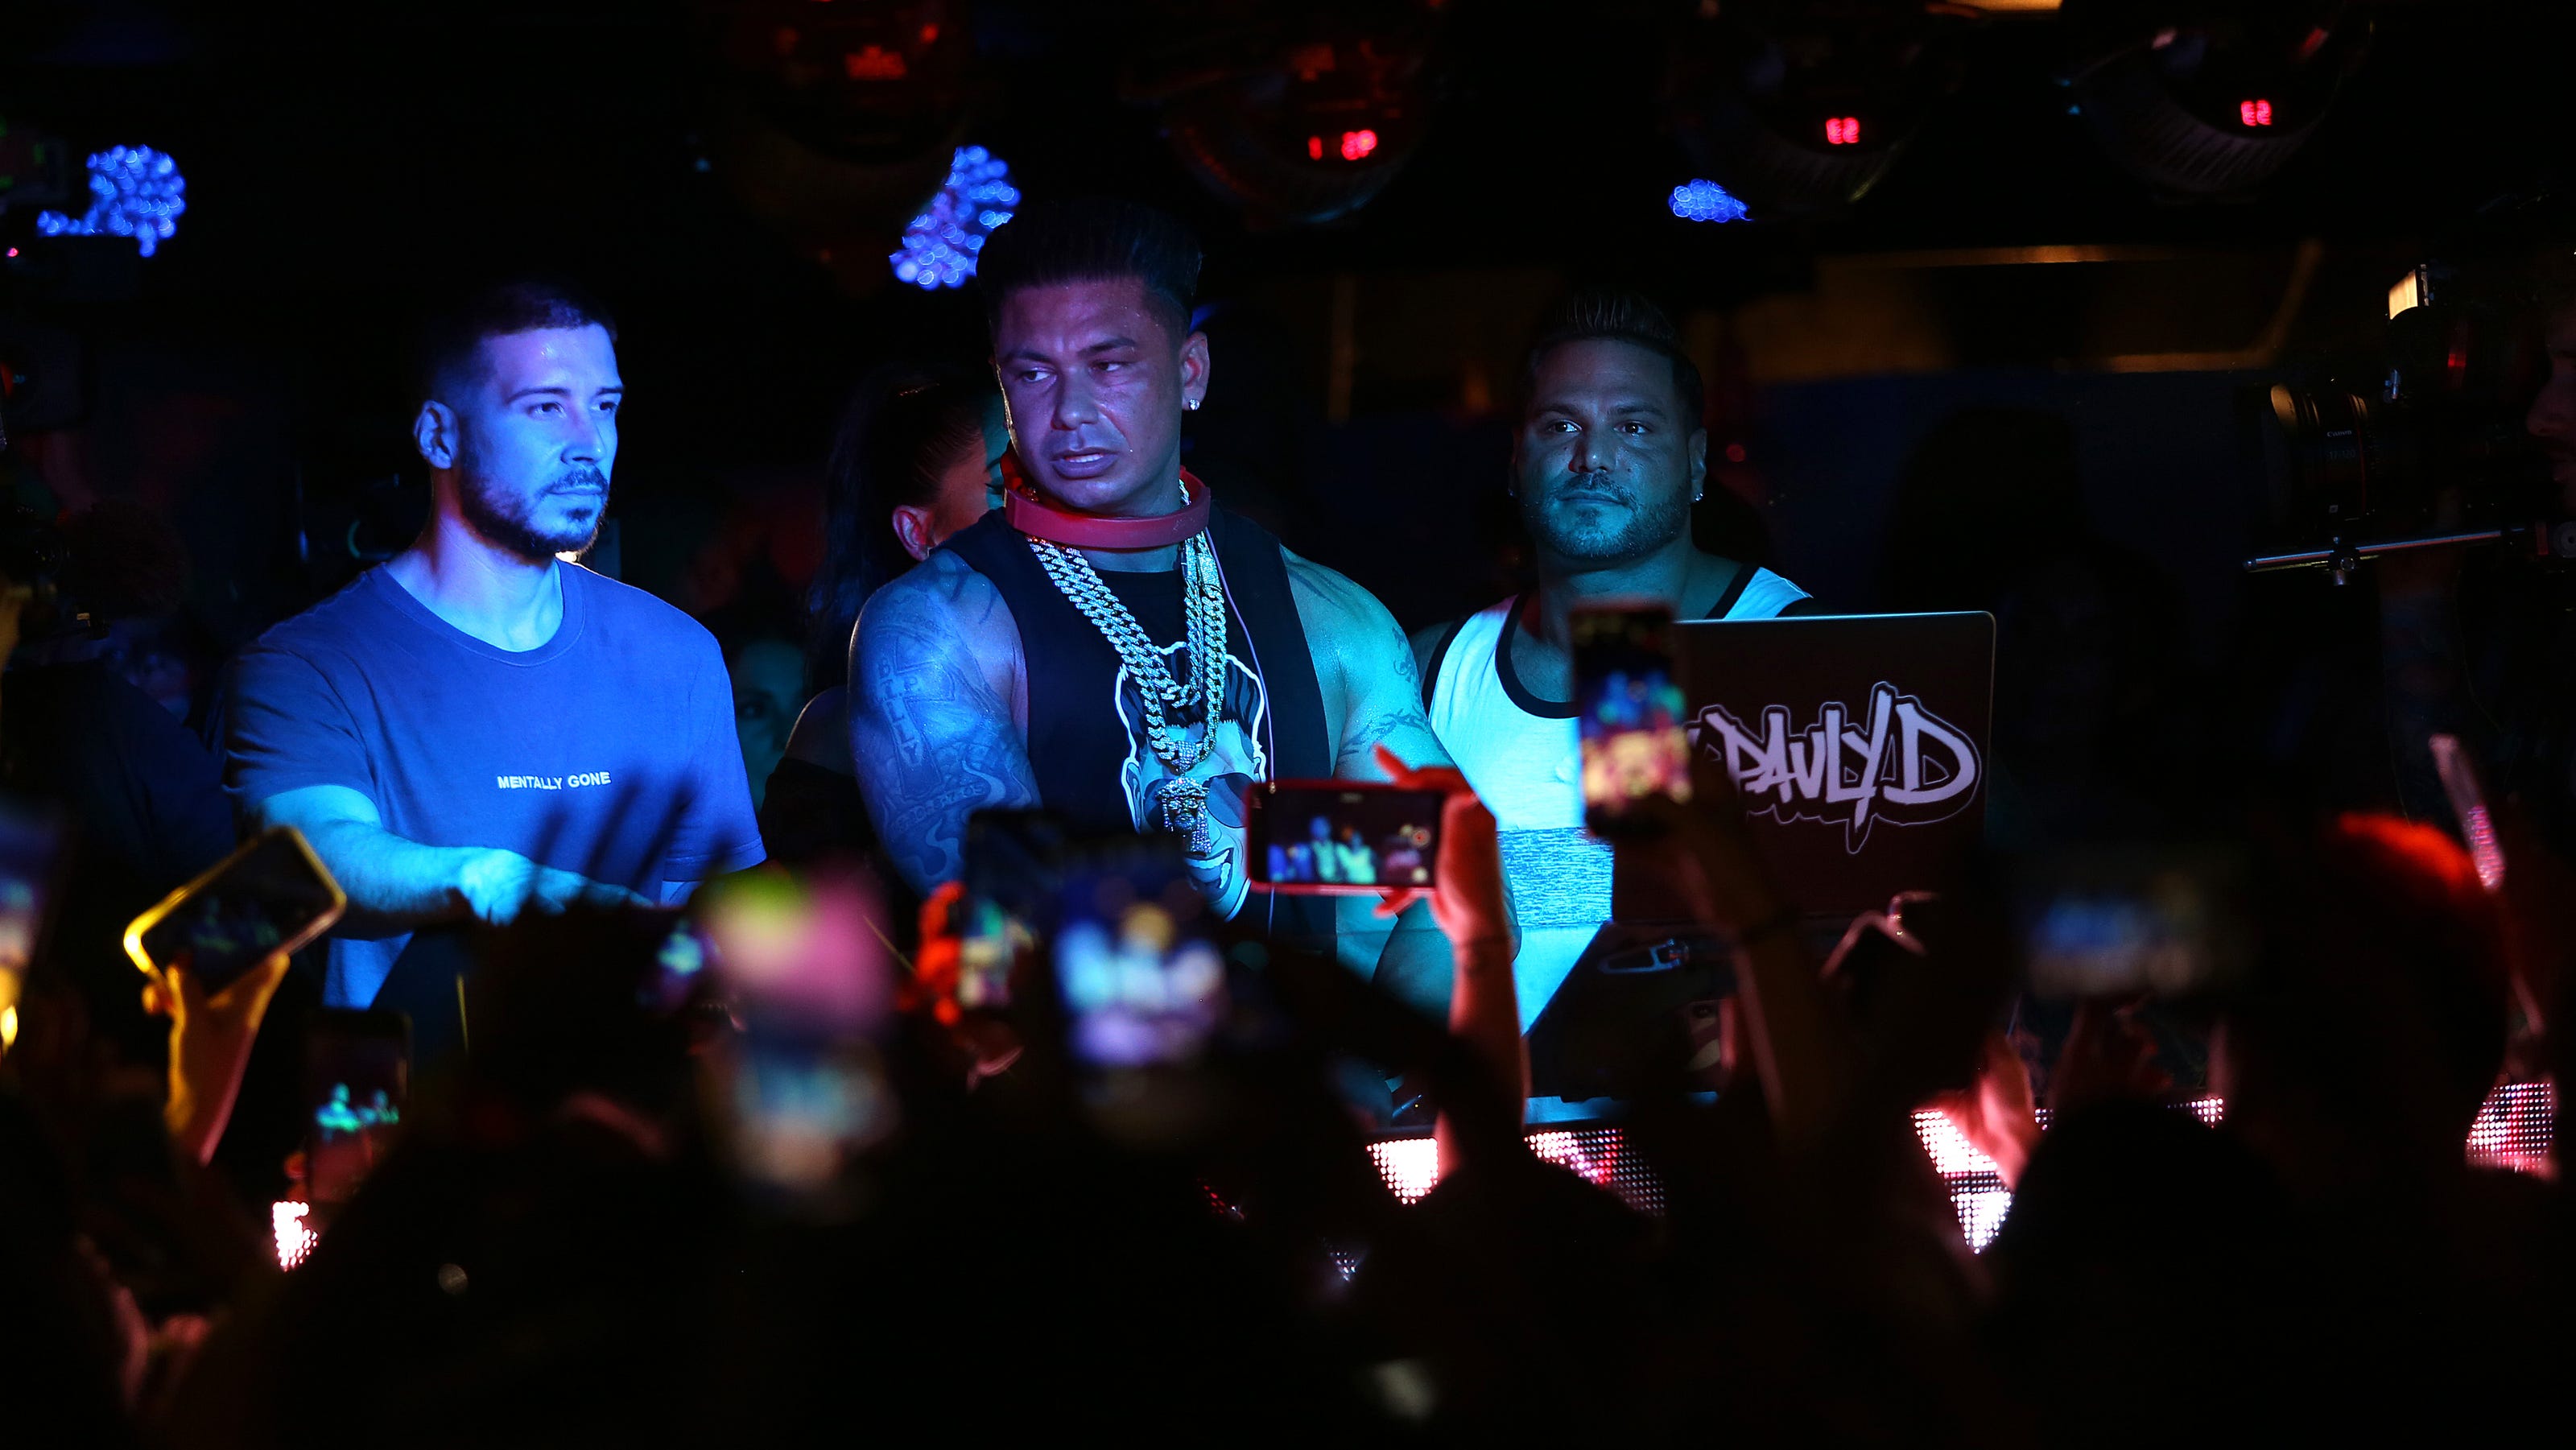 Jersey Shore Family Vacation: The Top 5 Jersey nightclubs as seen on TV